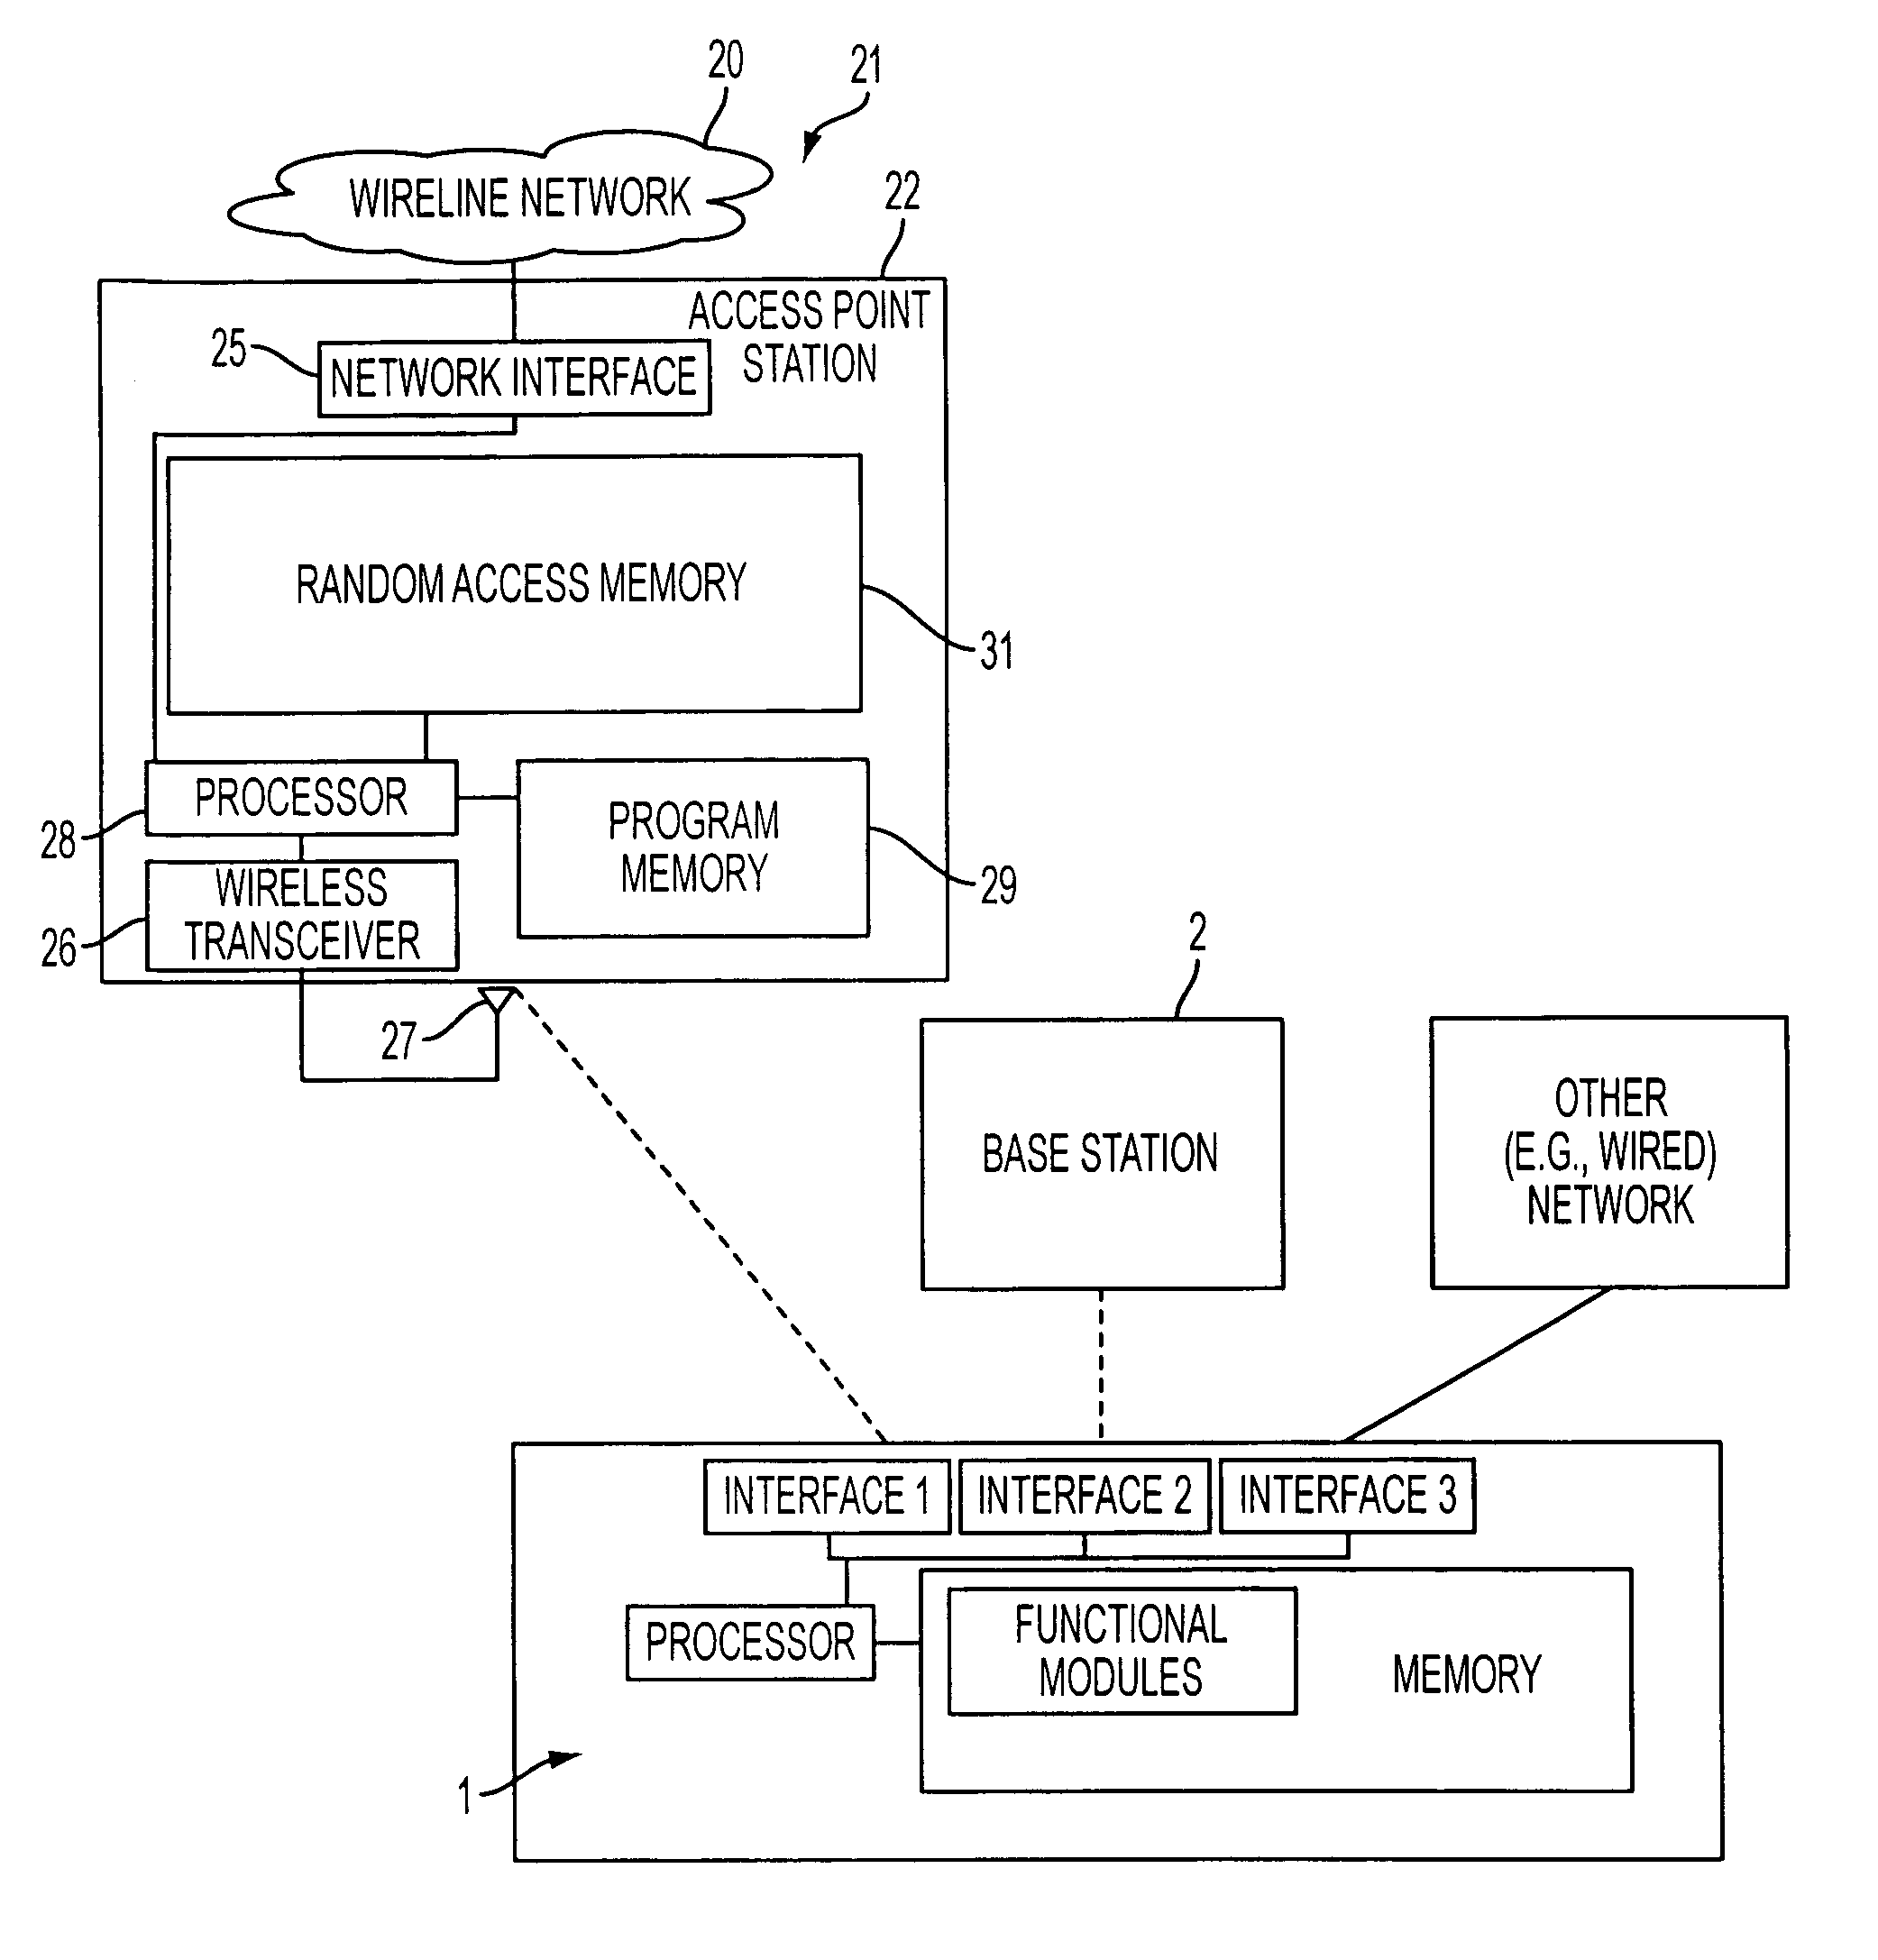 Intelligent connectivity framework for the simultaneous use of multiple interfaces